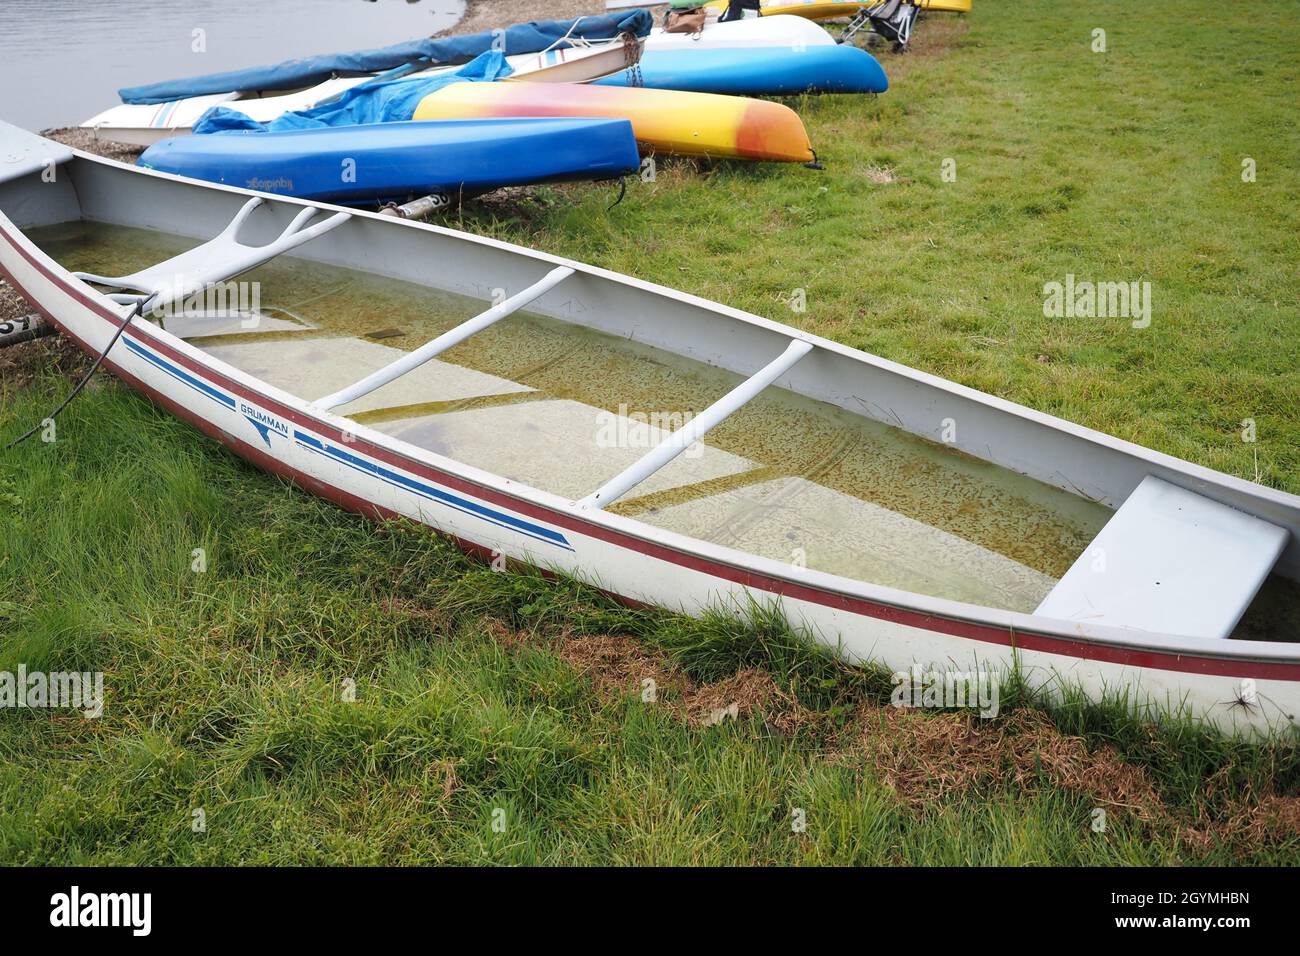 The canoe is completely waterlogged at this time. Someone should bail out the water. Stock Photo